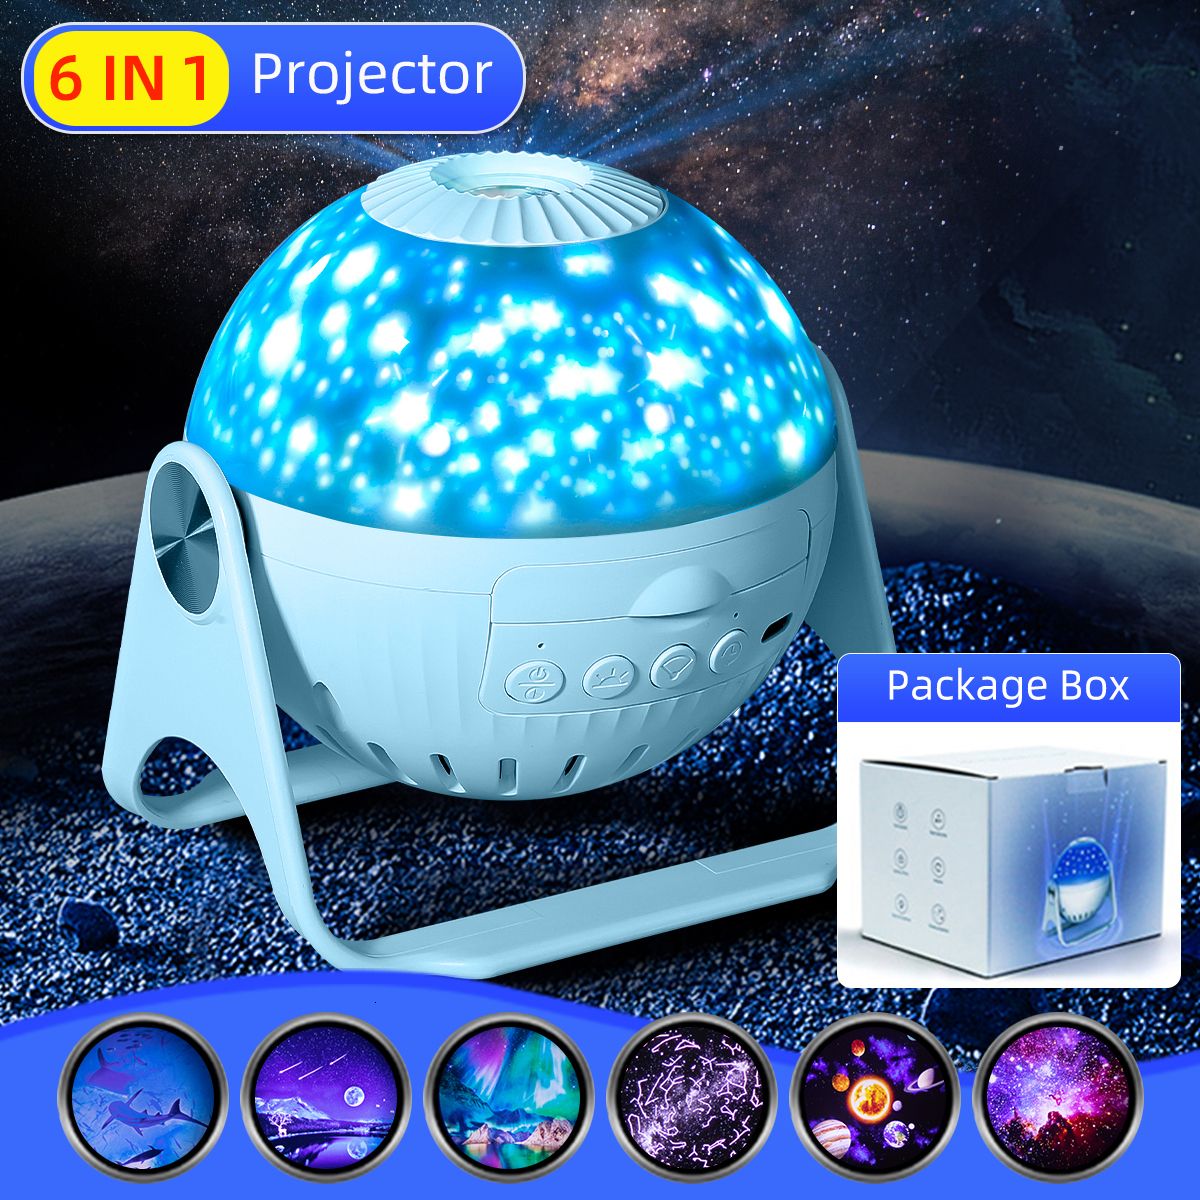 6 in 1 Projector2